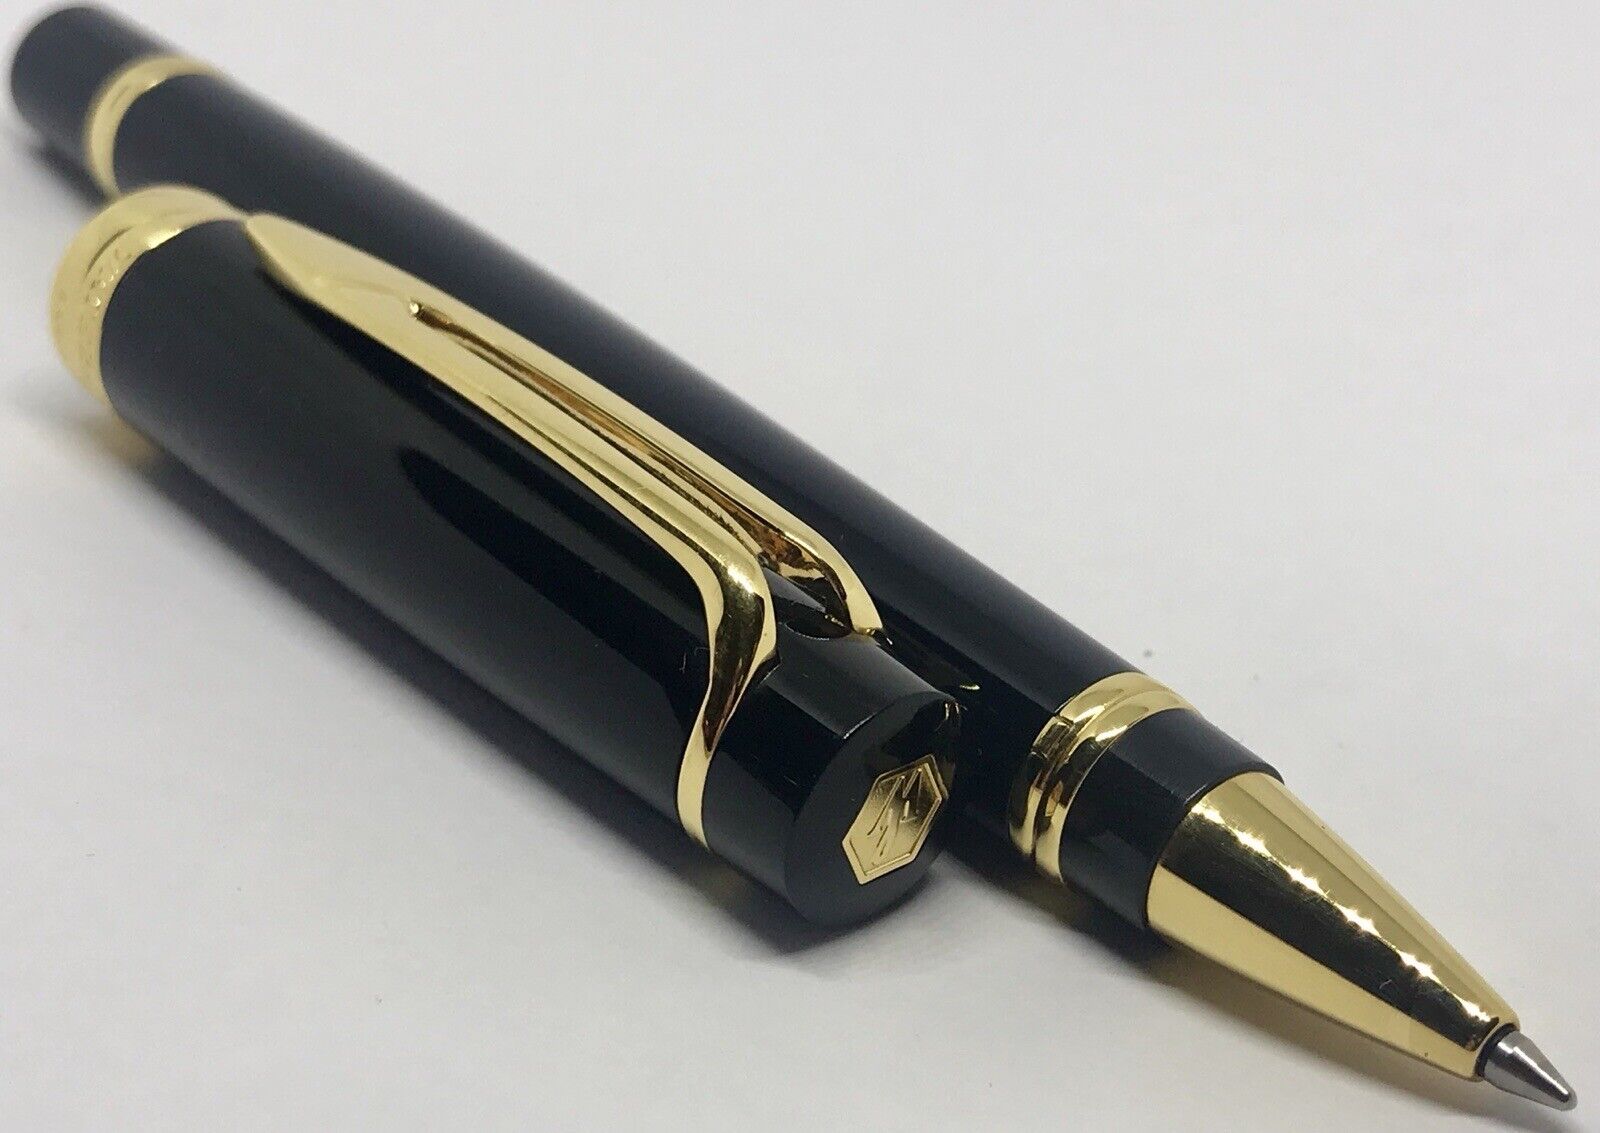 Astonishing Waterman Liaison Rollerball Pen - France - 18k Gold Plated